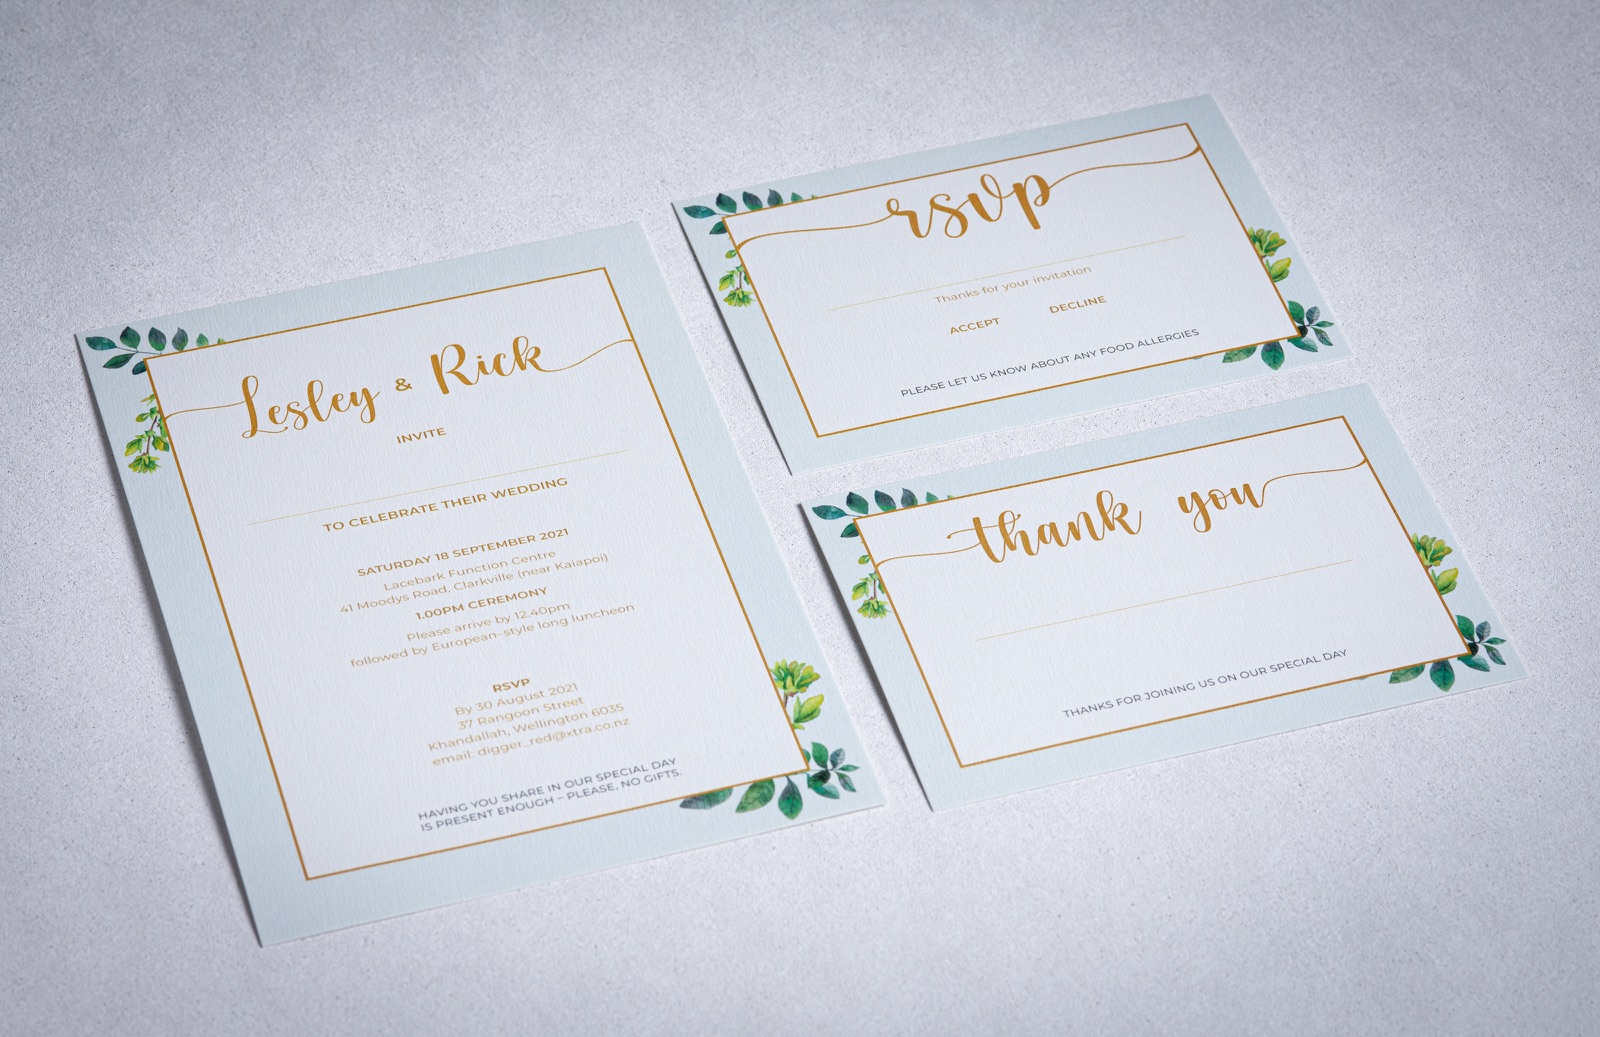 Celebrating Love in Style: Lesley and Rick's Wedding Stationery